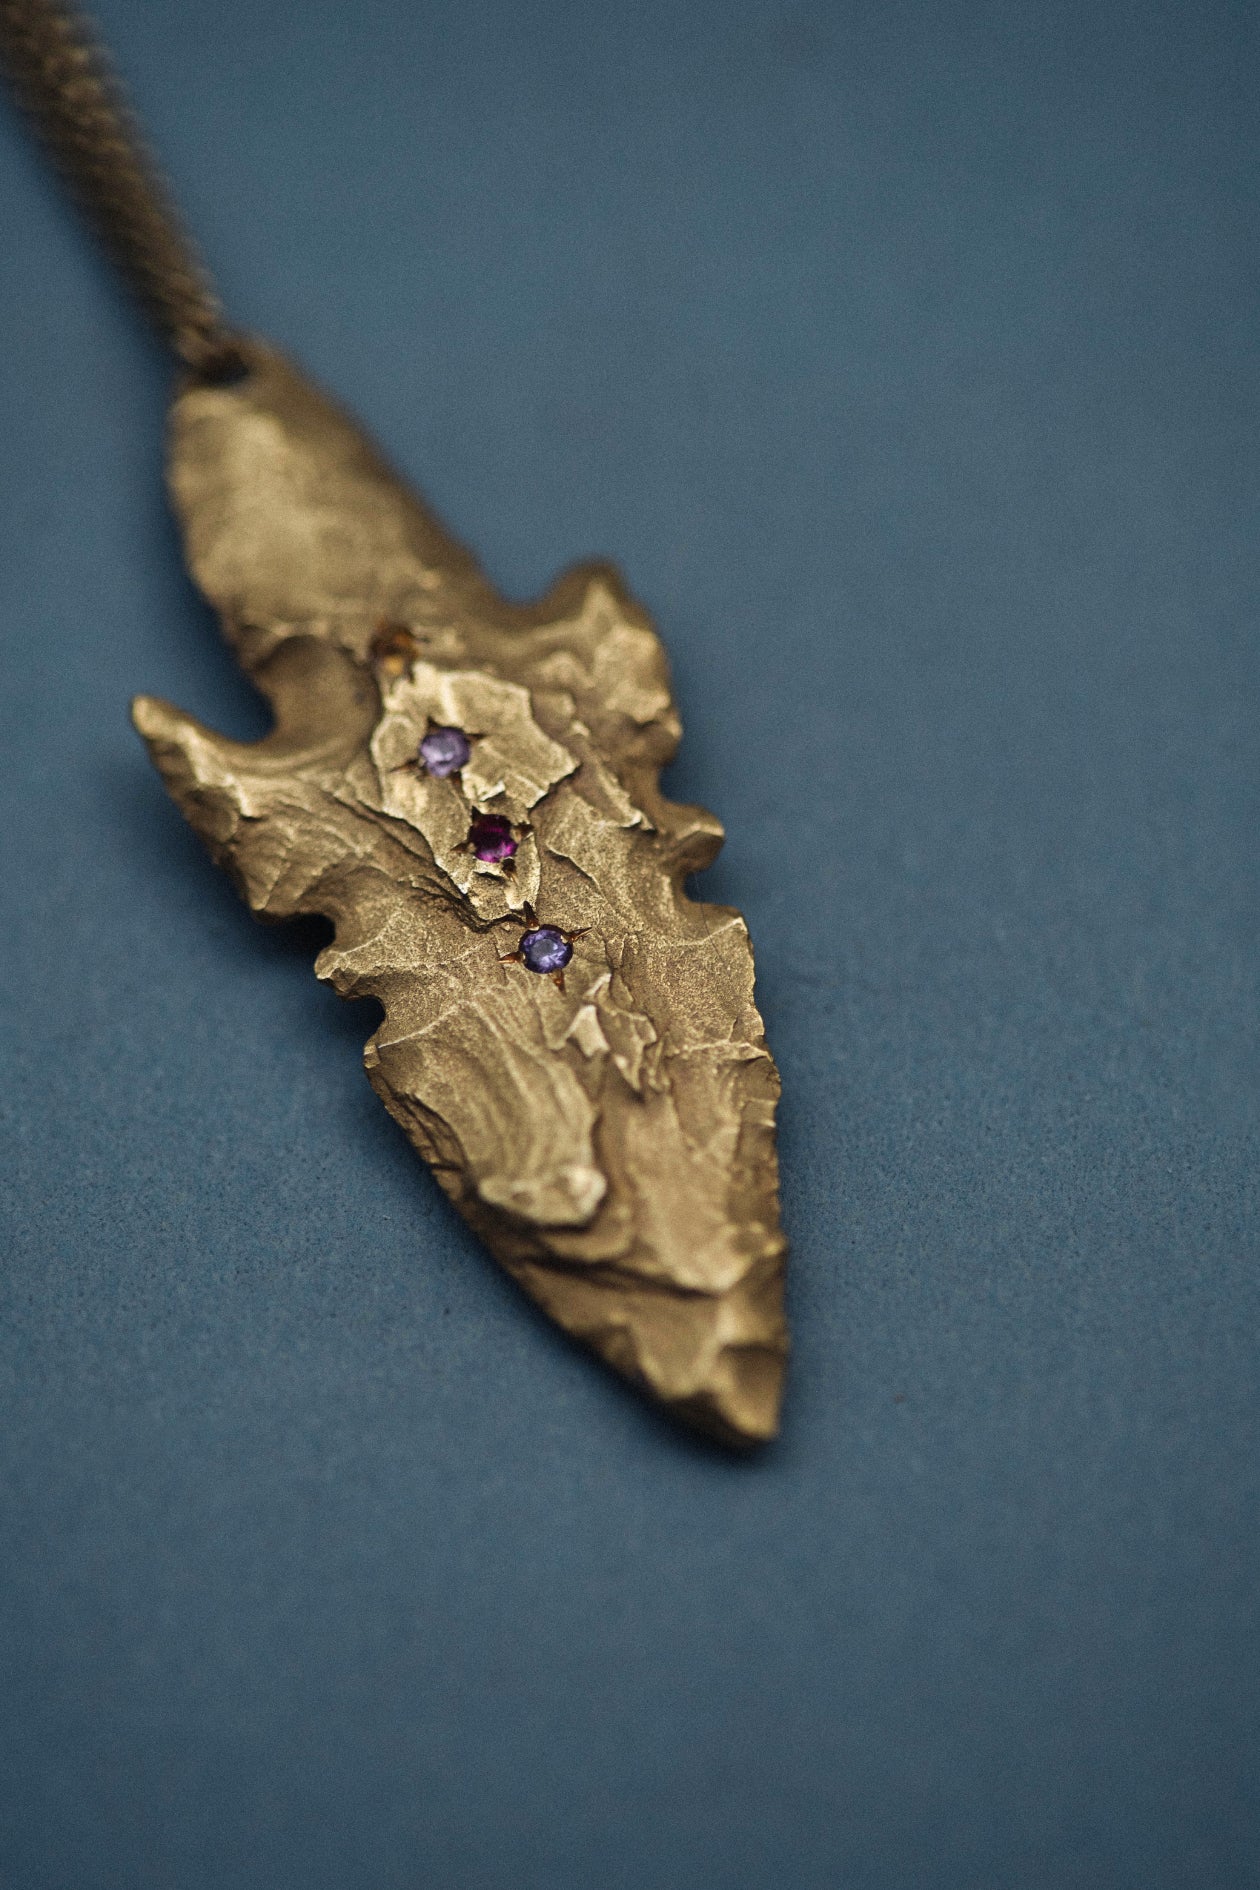 A pendant made from the cast of a neolithic era arrowhead. It is set with ruby, amethyst, pink and yellow sapphires on a curb-link chain. Handmade by Violette Stehli. Photo Cécile Chabert.